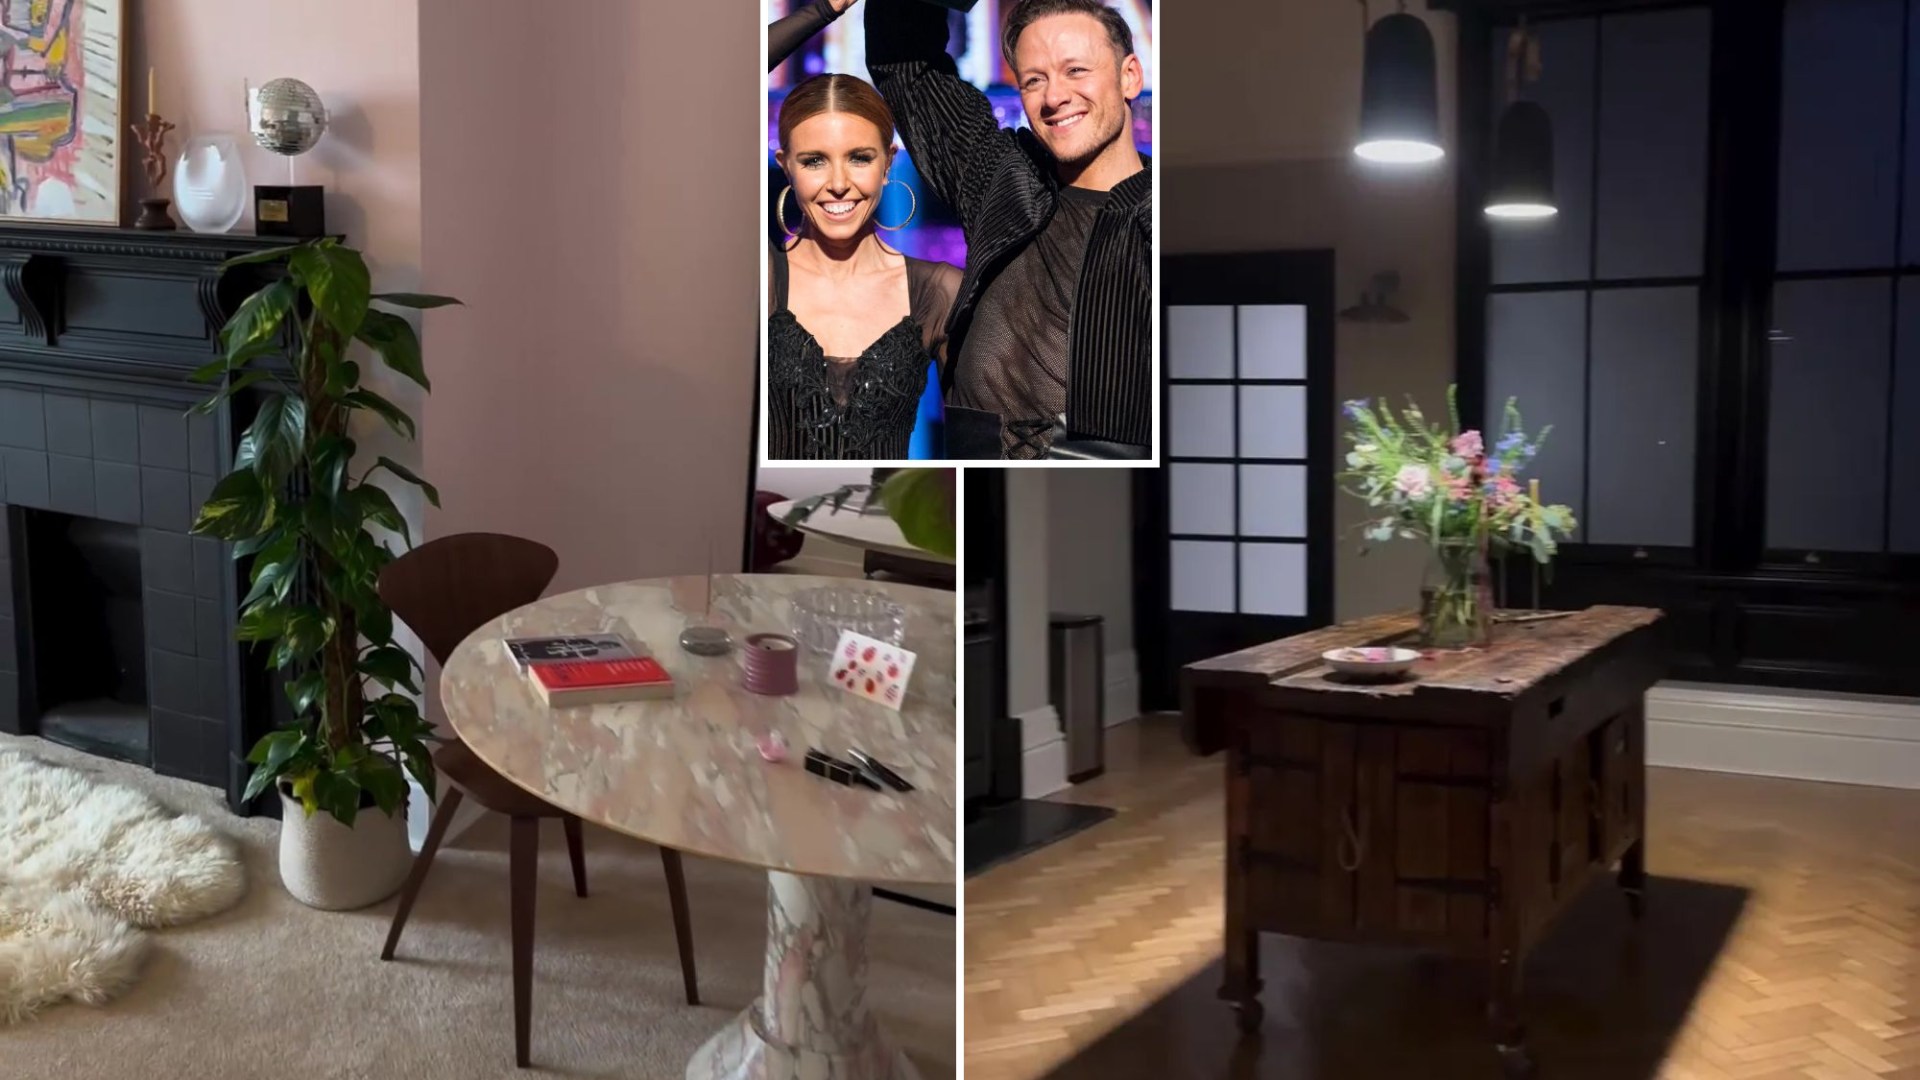 Inside Stacey Dooley and Kevin Cliftons incredible new home so big it looks like hotel – after he reveals surprise move [Video]